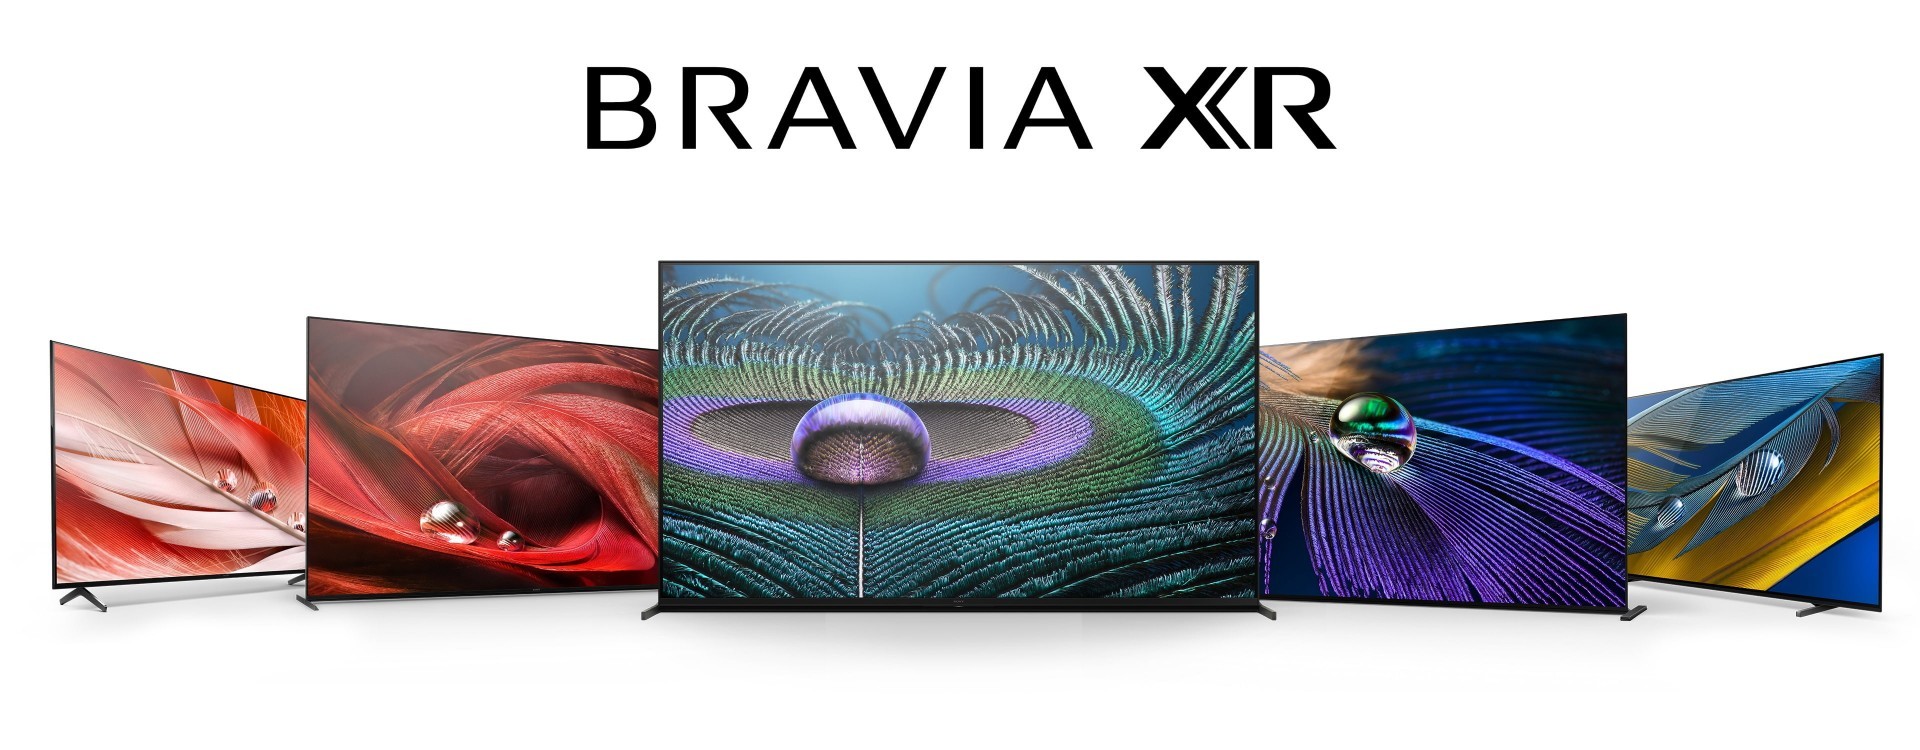 Sony 發表「Perfect for PS5」BRAVIA XR 系列電視 搭載獨家 PS5 對應功能